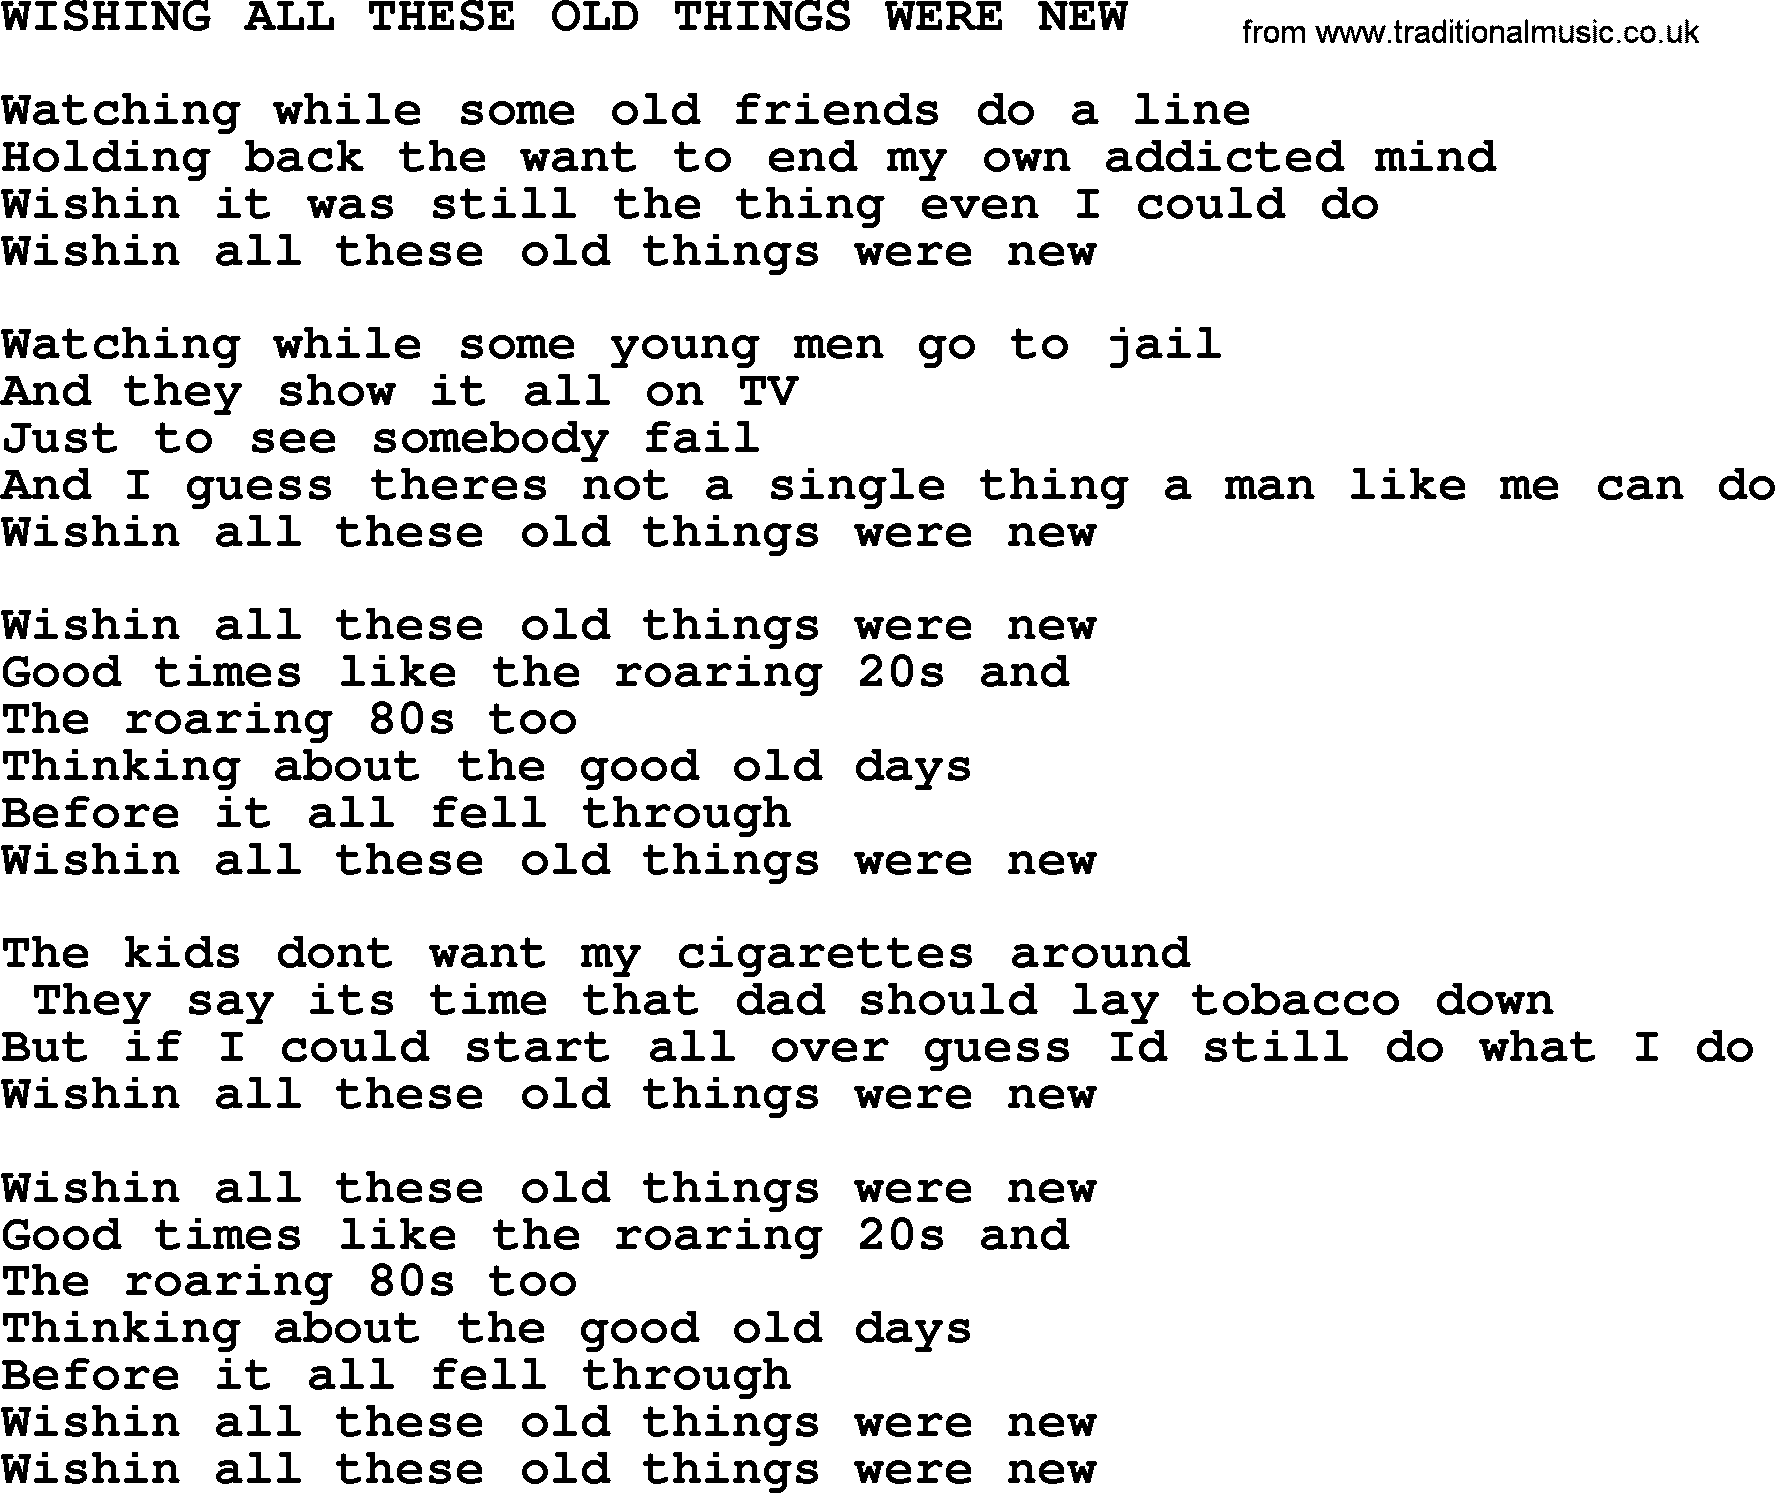 Merle Haggard song: Wishing All These Old Things Were New, lyrics.